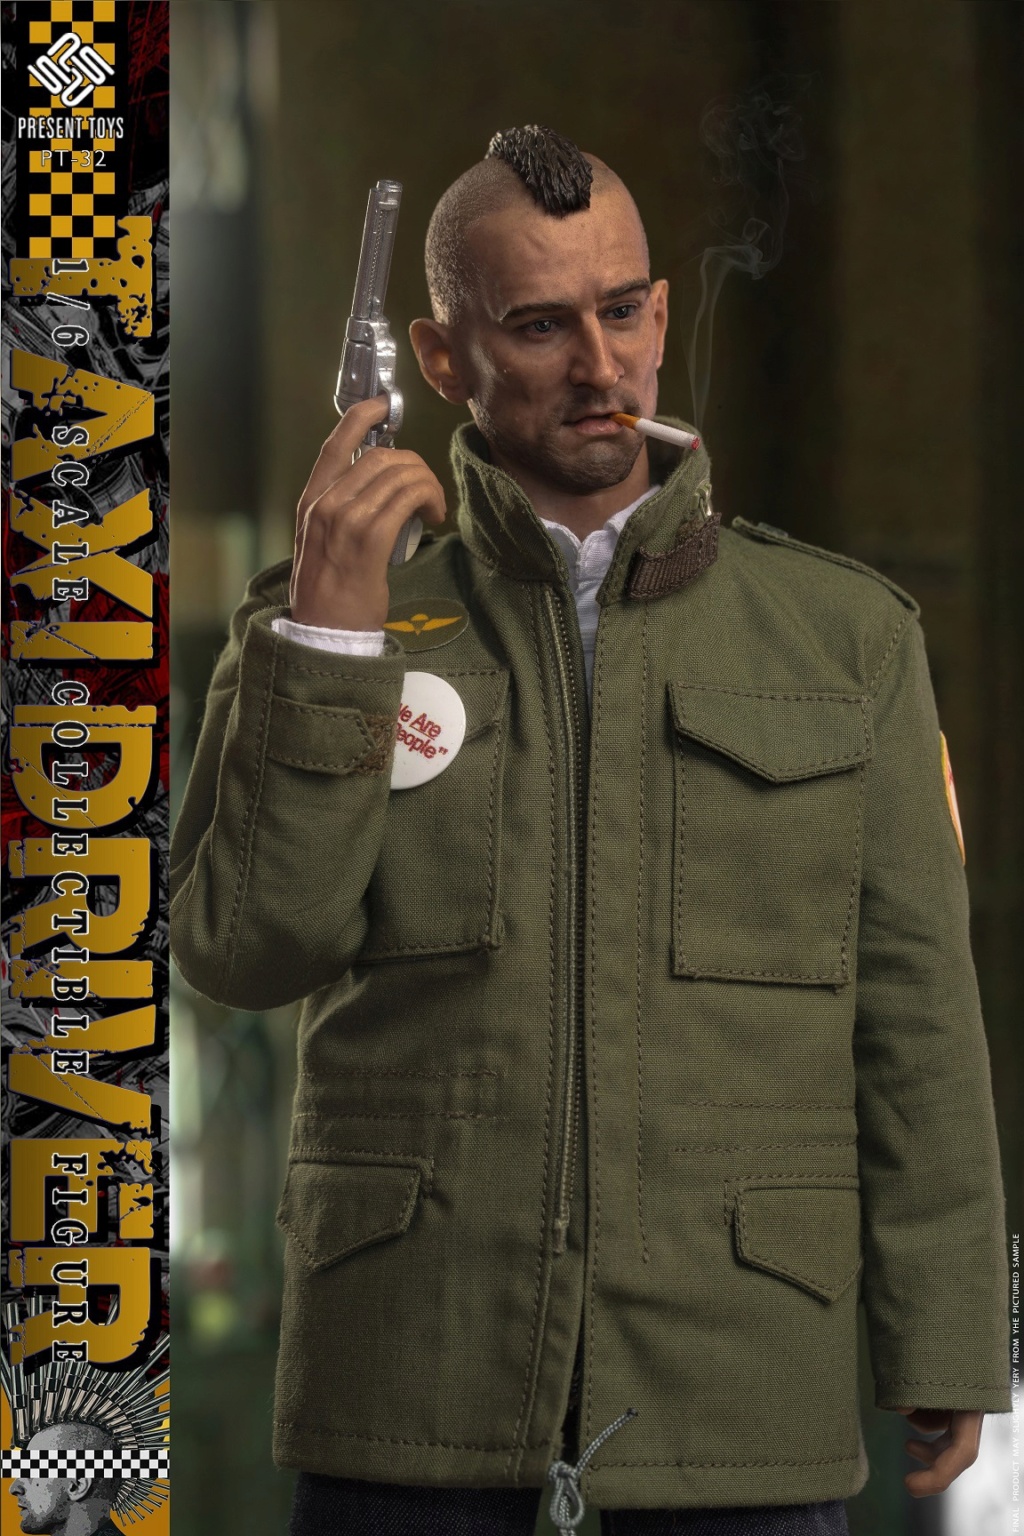 movie-based - NEW PRODUCT: Present Toys: 1/6 "Taxi Driver" Collection Doll#PT-sp32 18193010